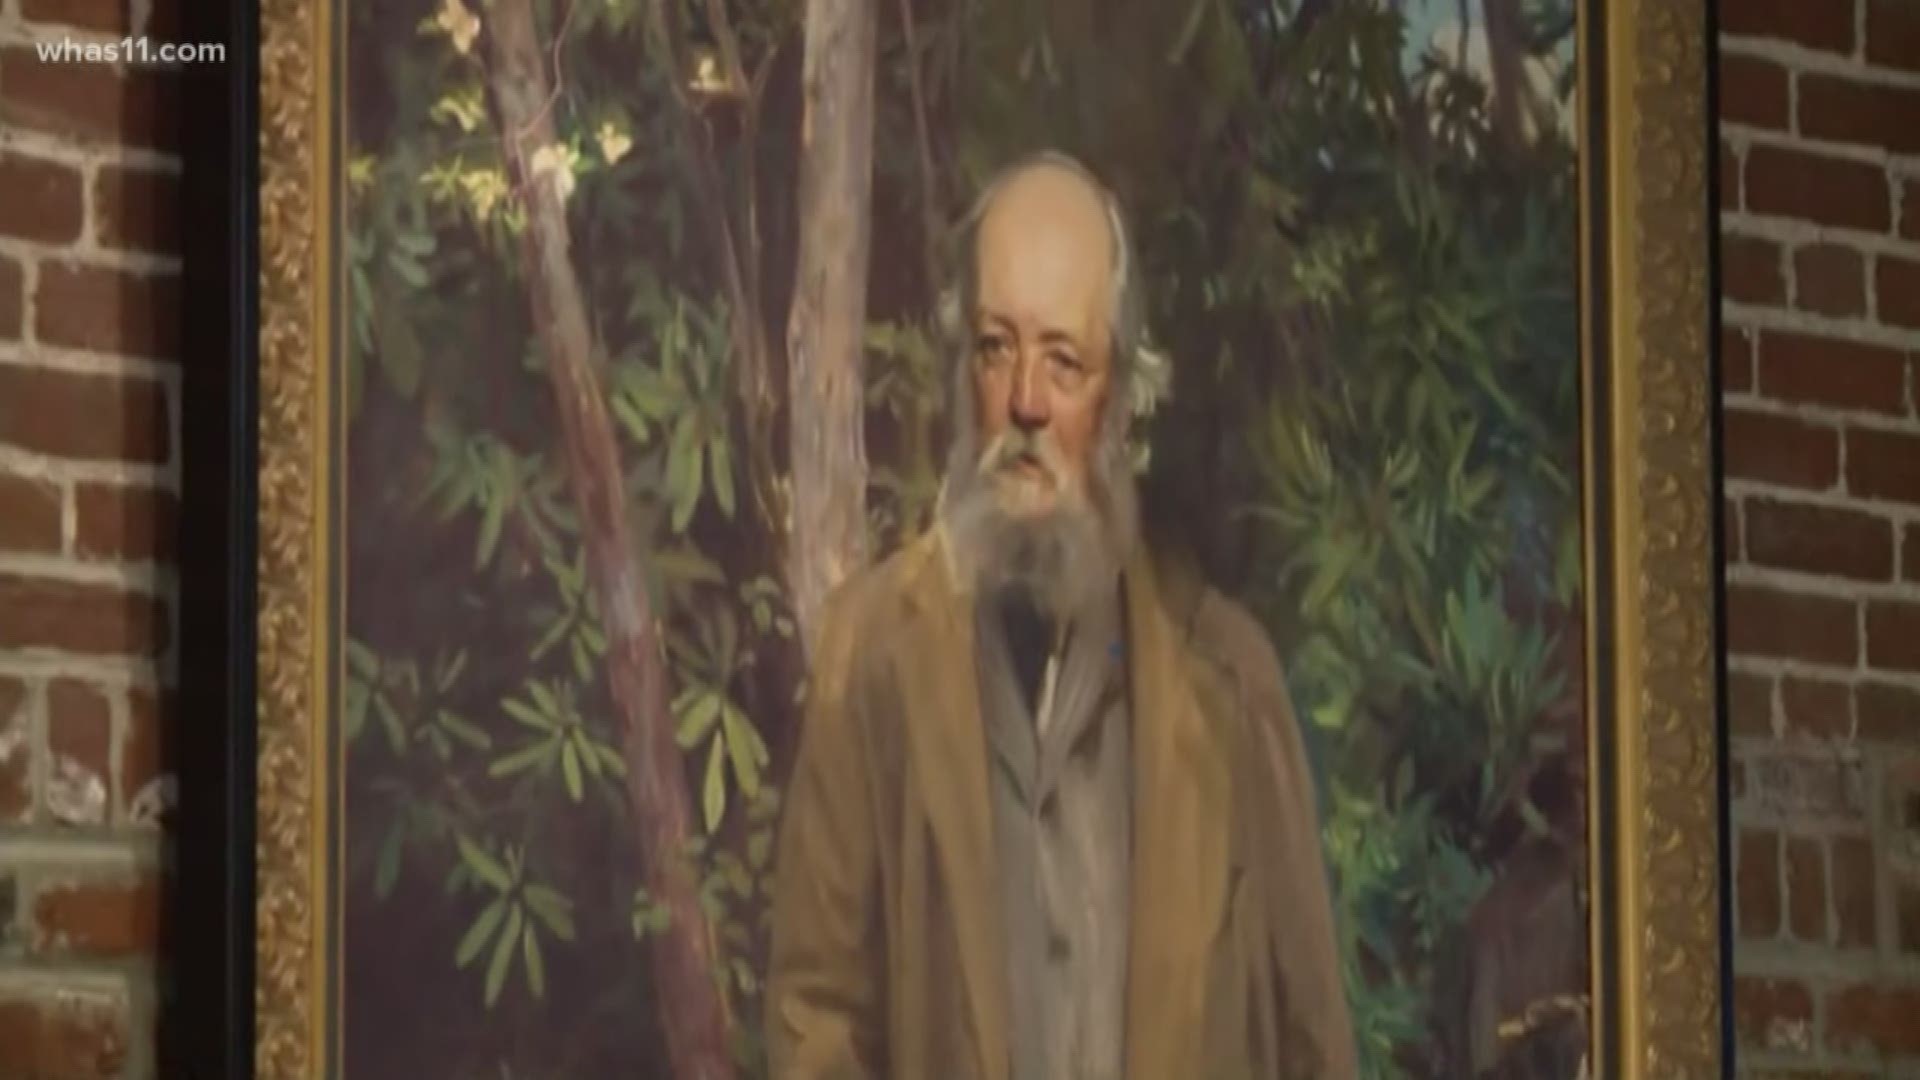 You can visit a new exhibit at the Frazier Museum honoring Olmsted while also taking home a piece of his vision.